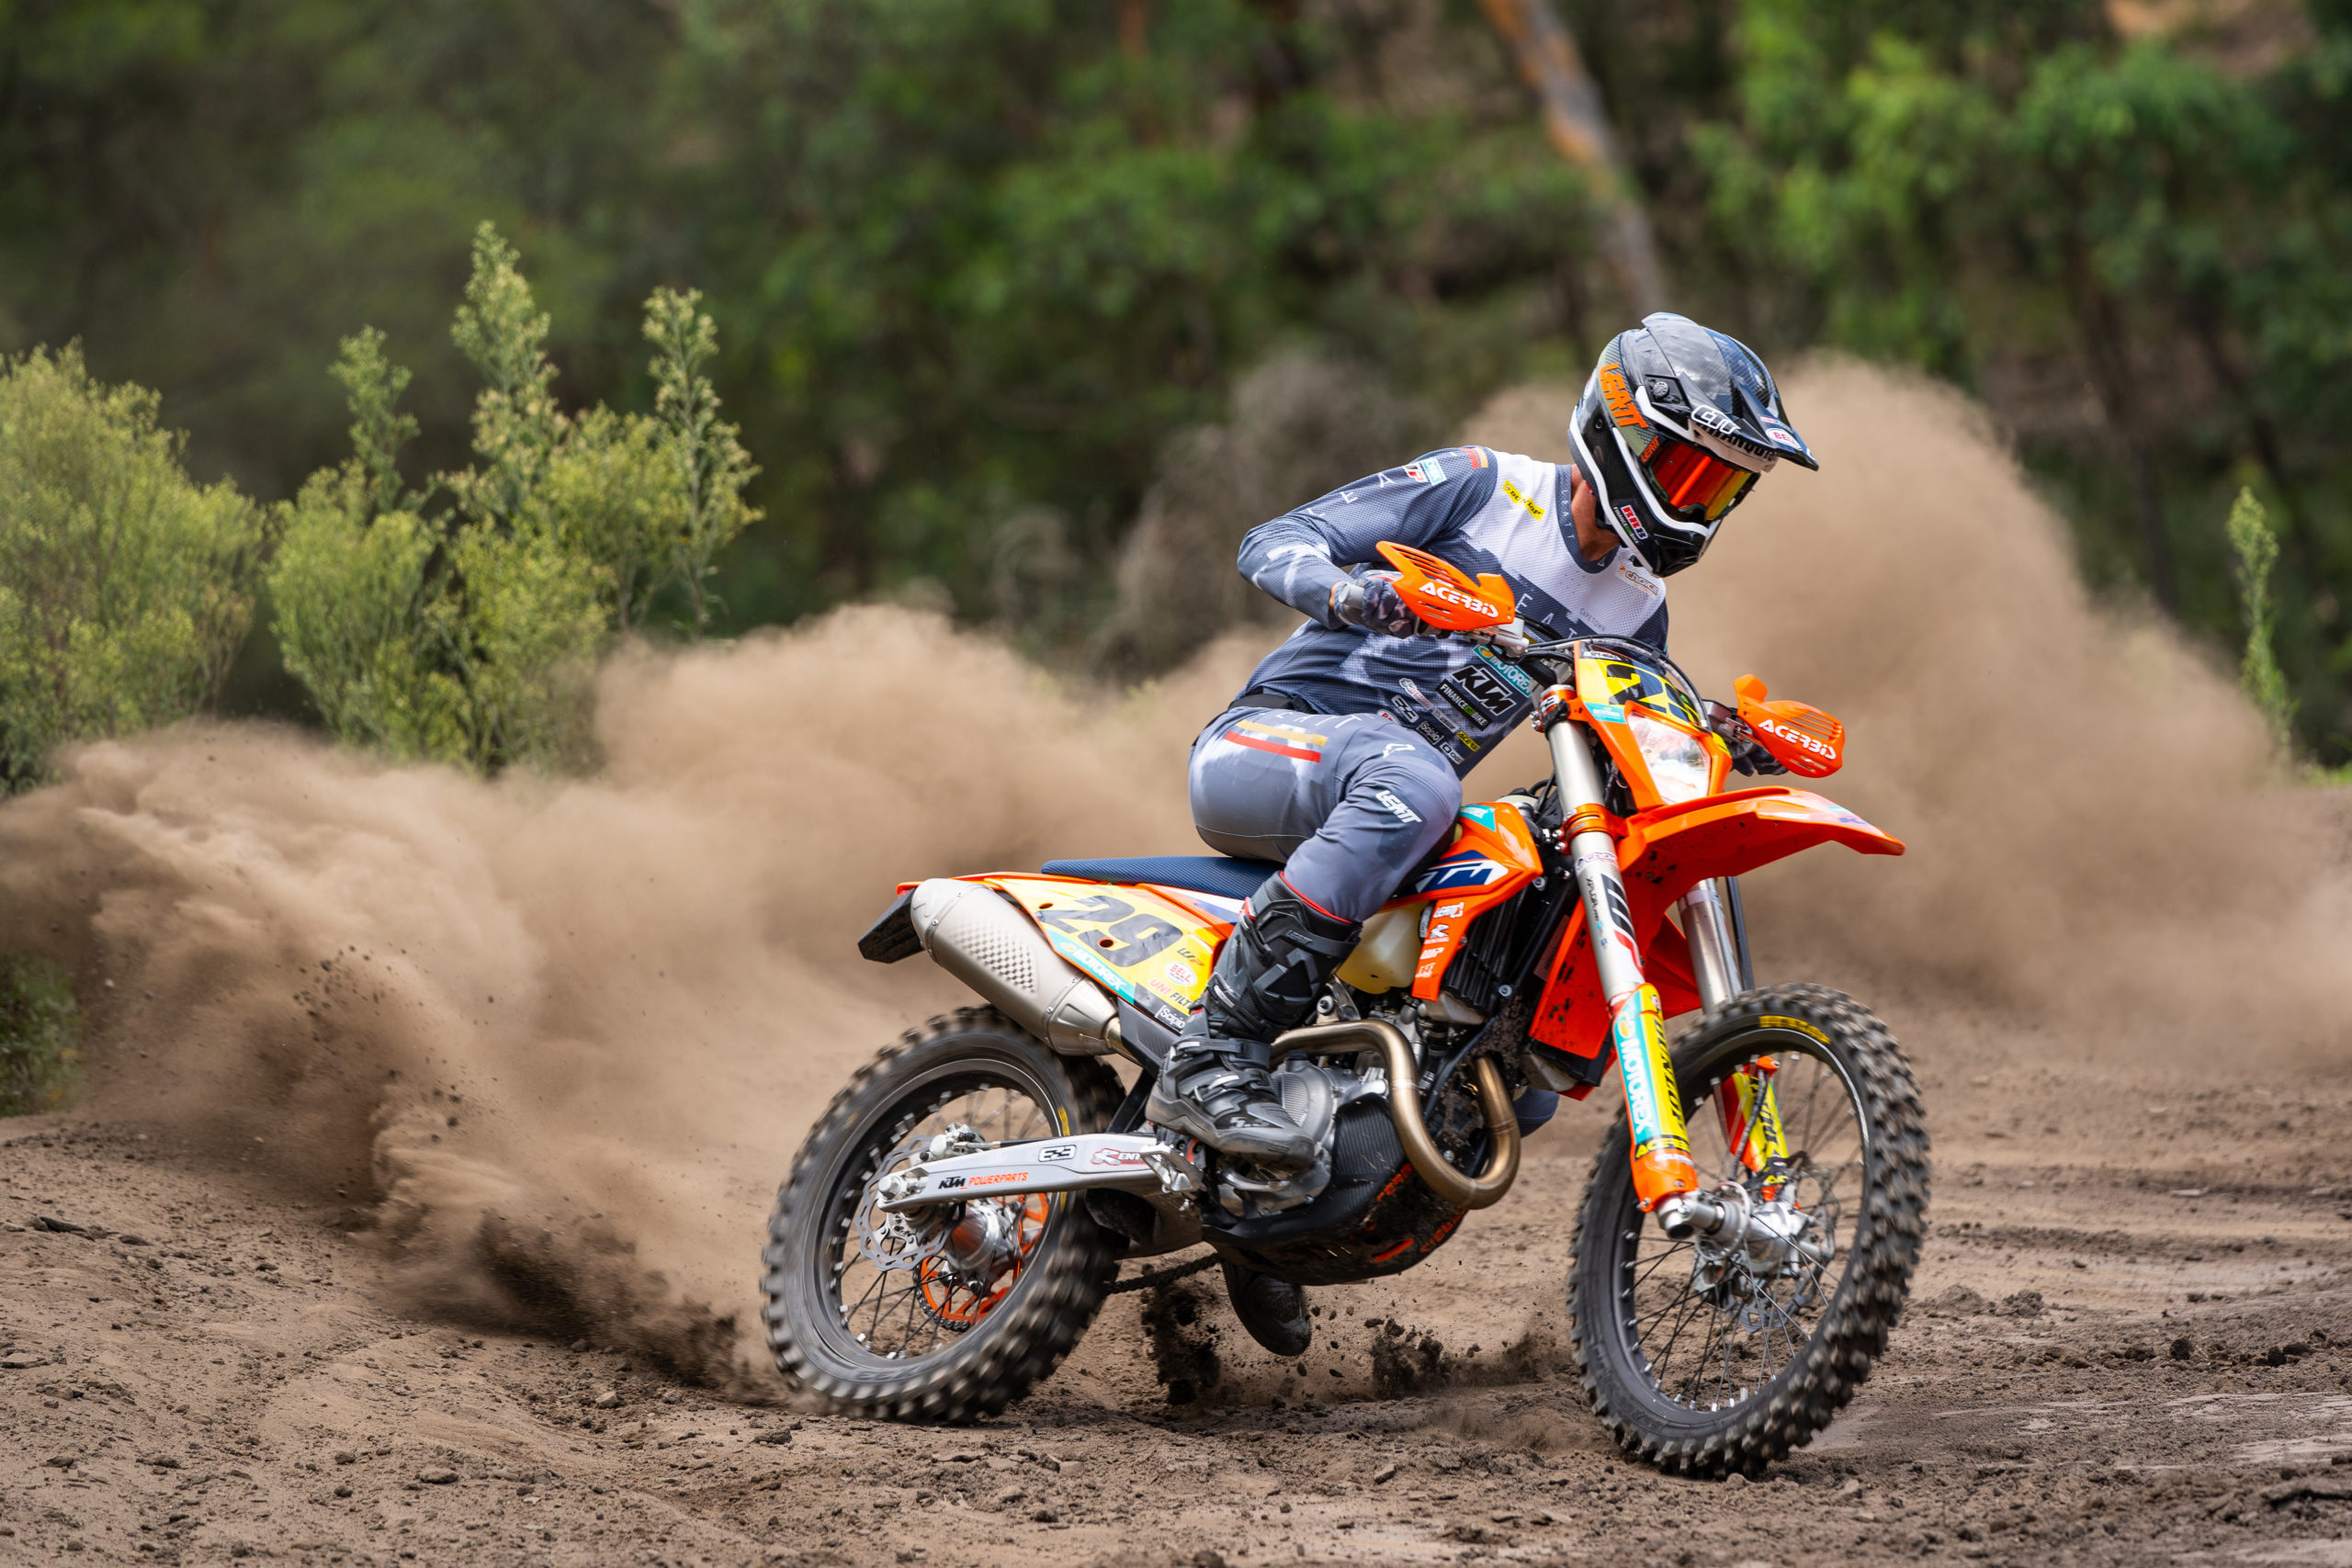 KTM SIGNS OFF-ROAD POWER COUPLE - Transmoto